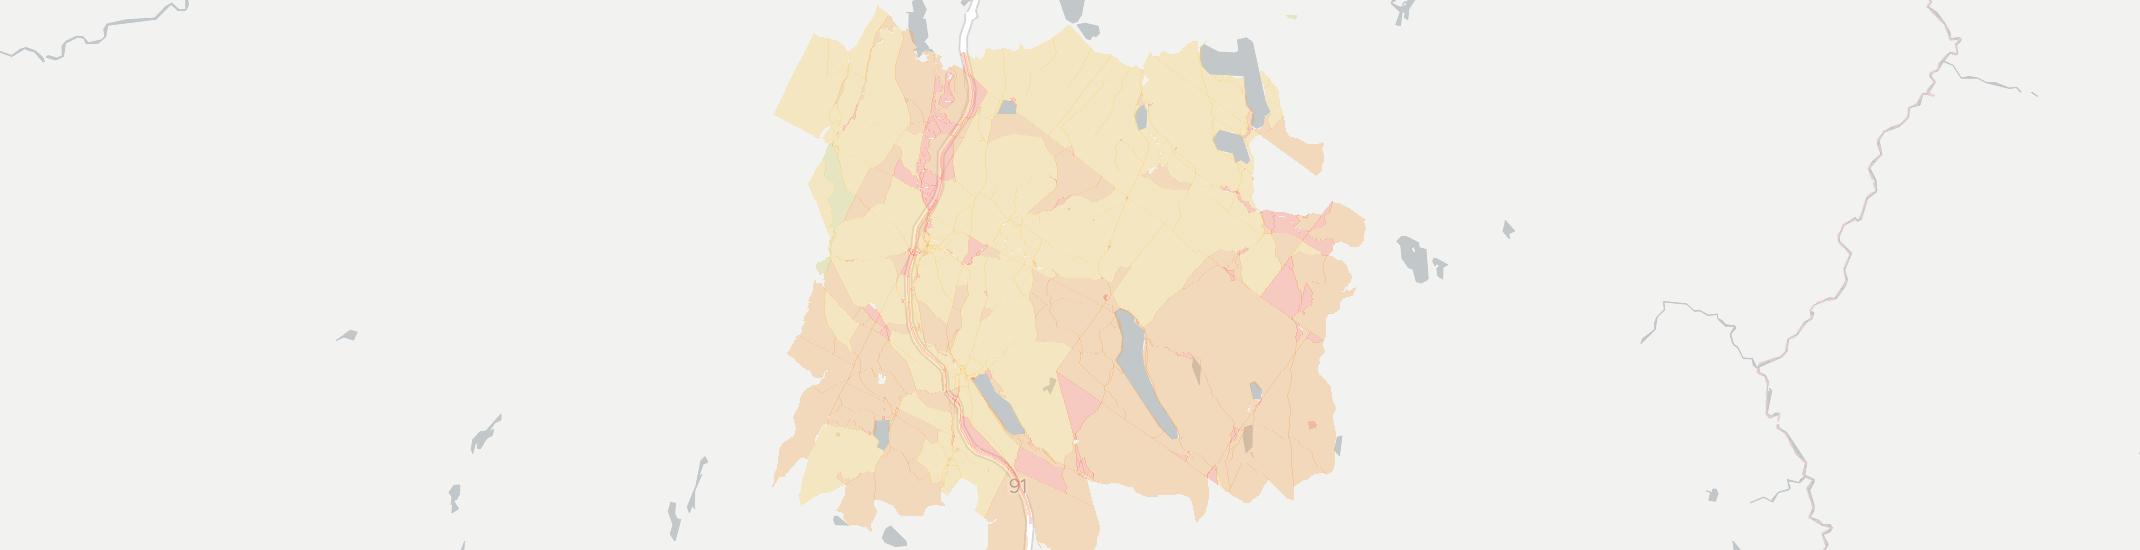 Orleans Internet Competition Map. Click for interactive map